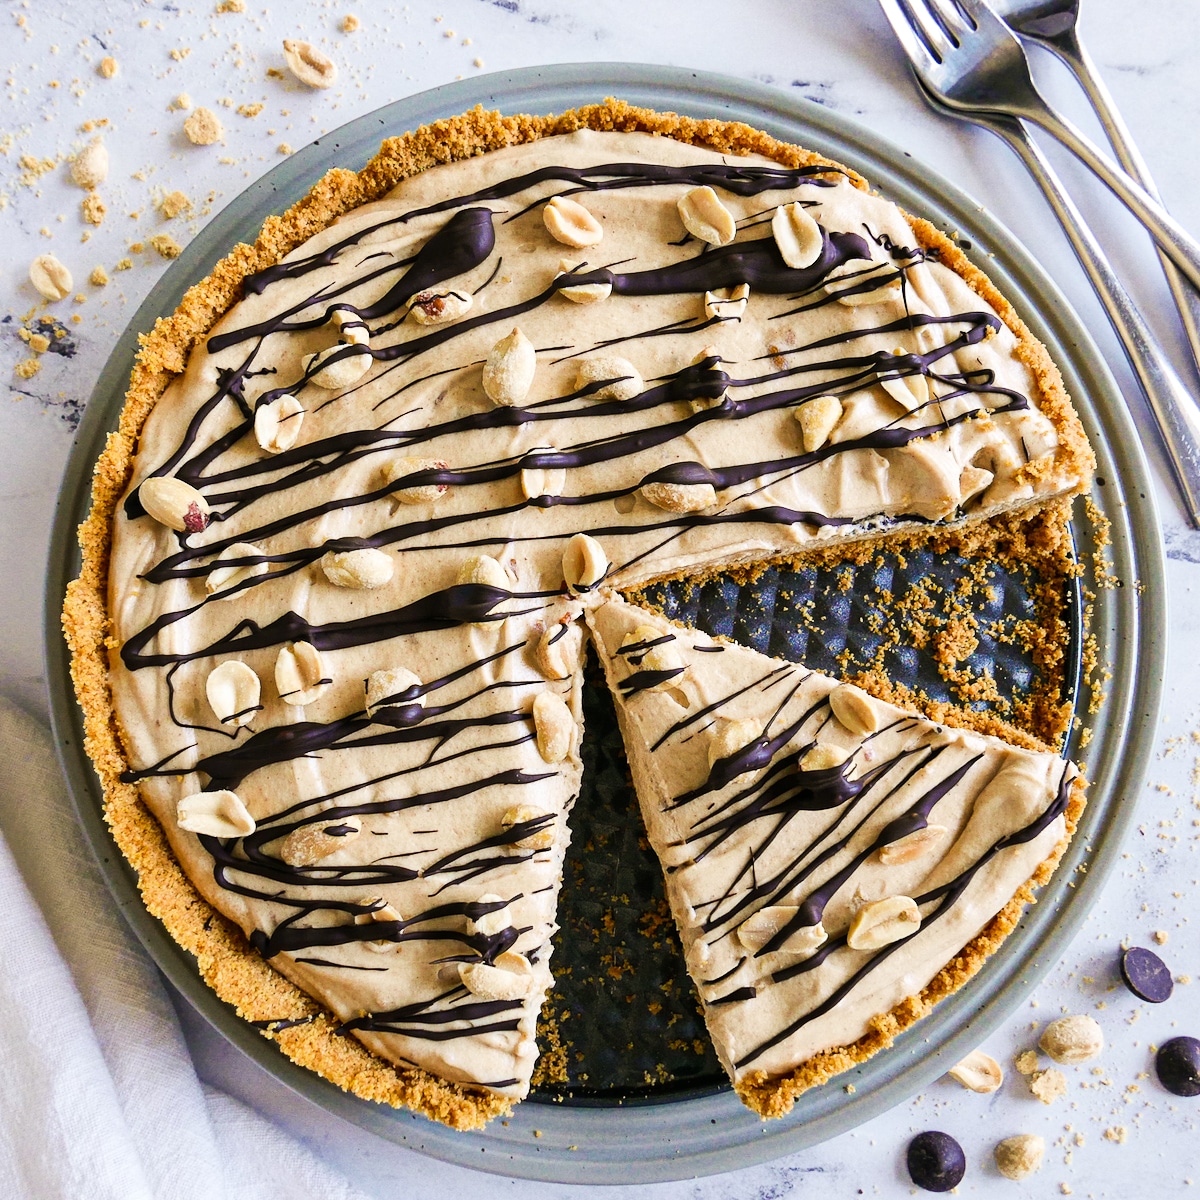 peanut butter pie with one slice cut and garnished with peanuts.